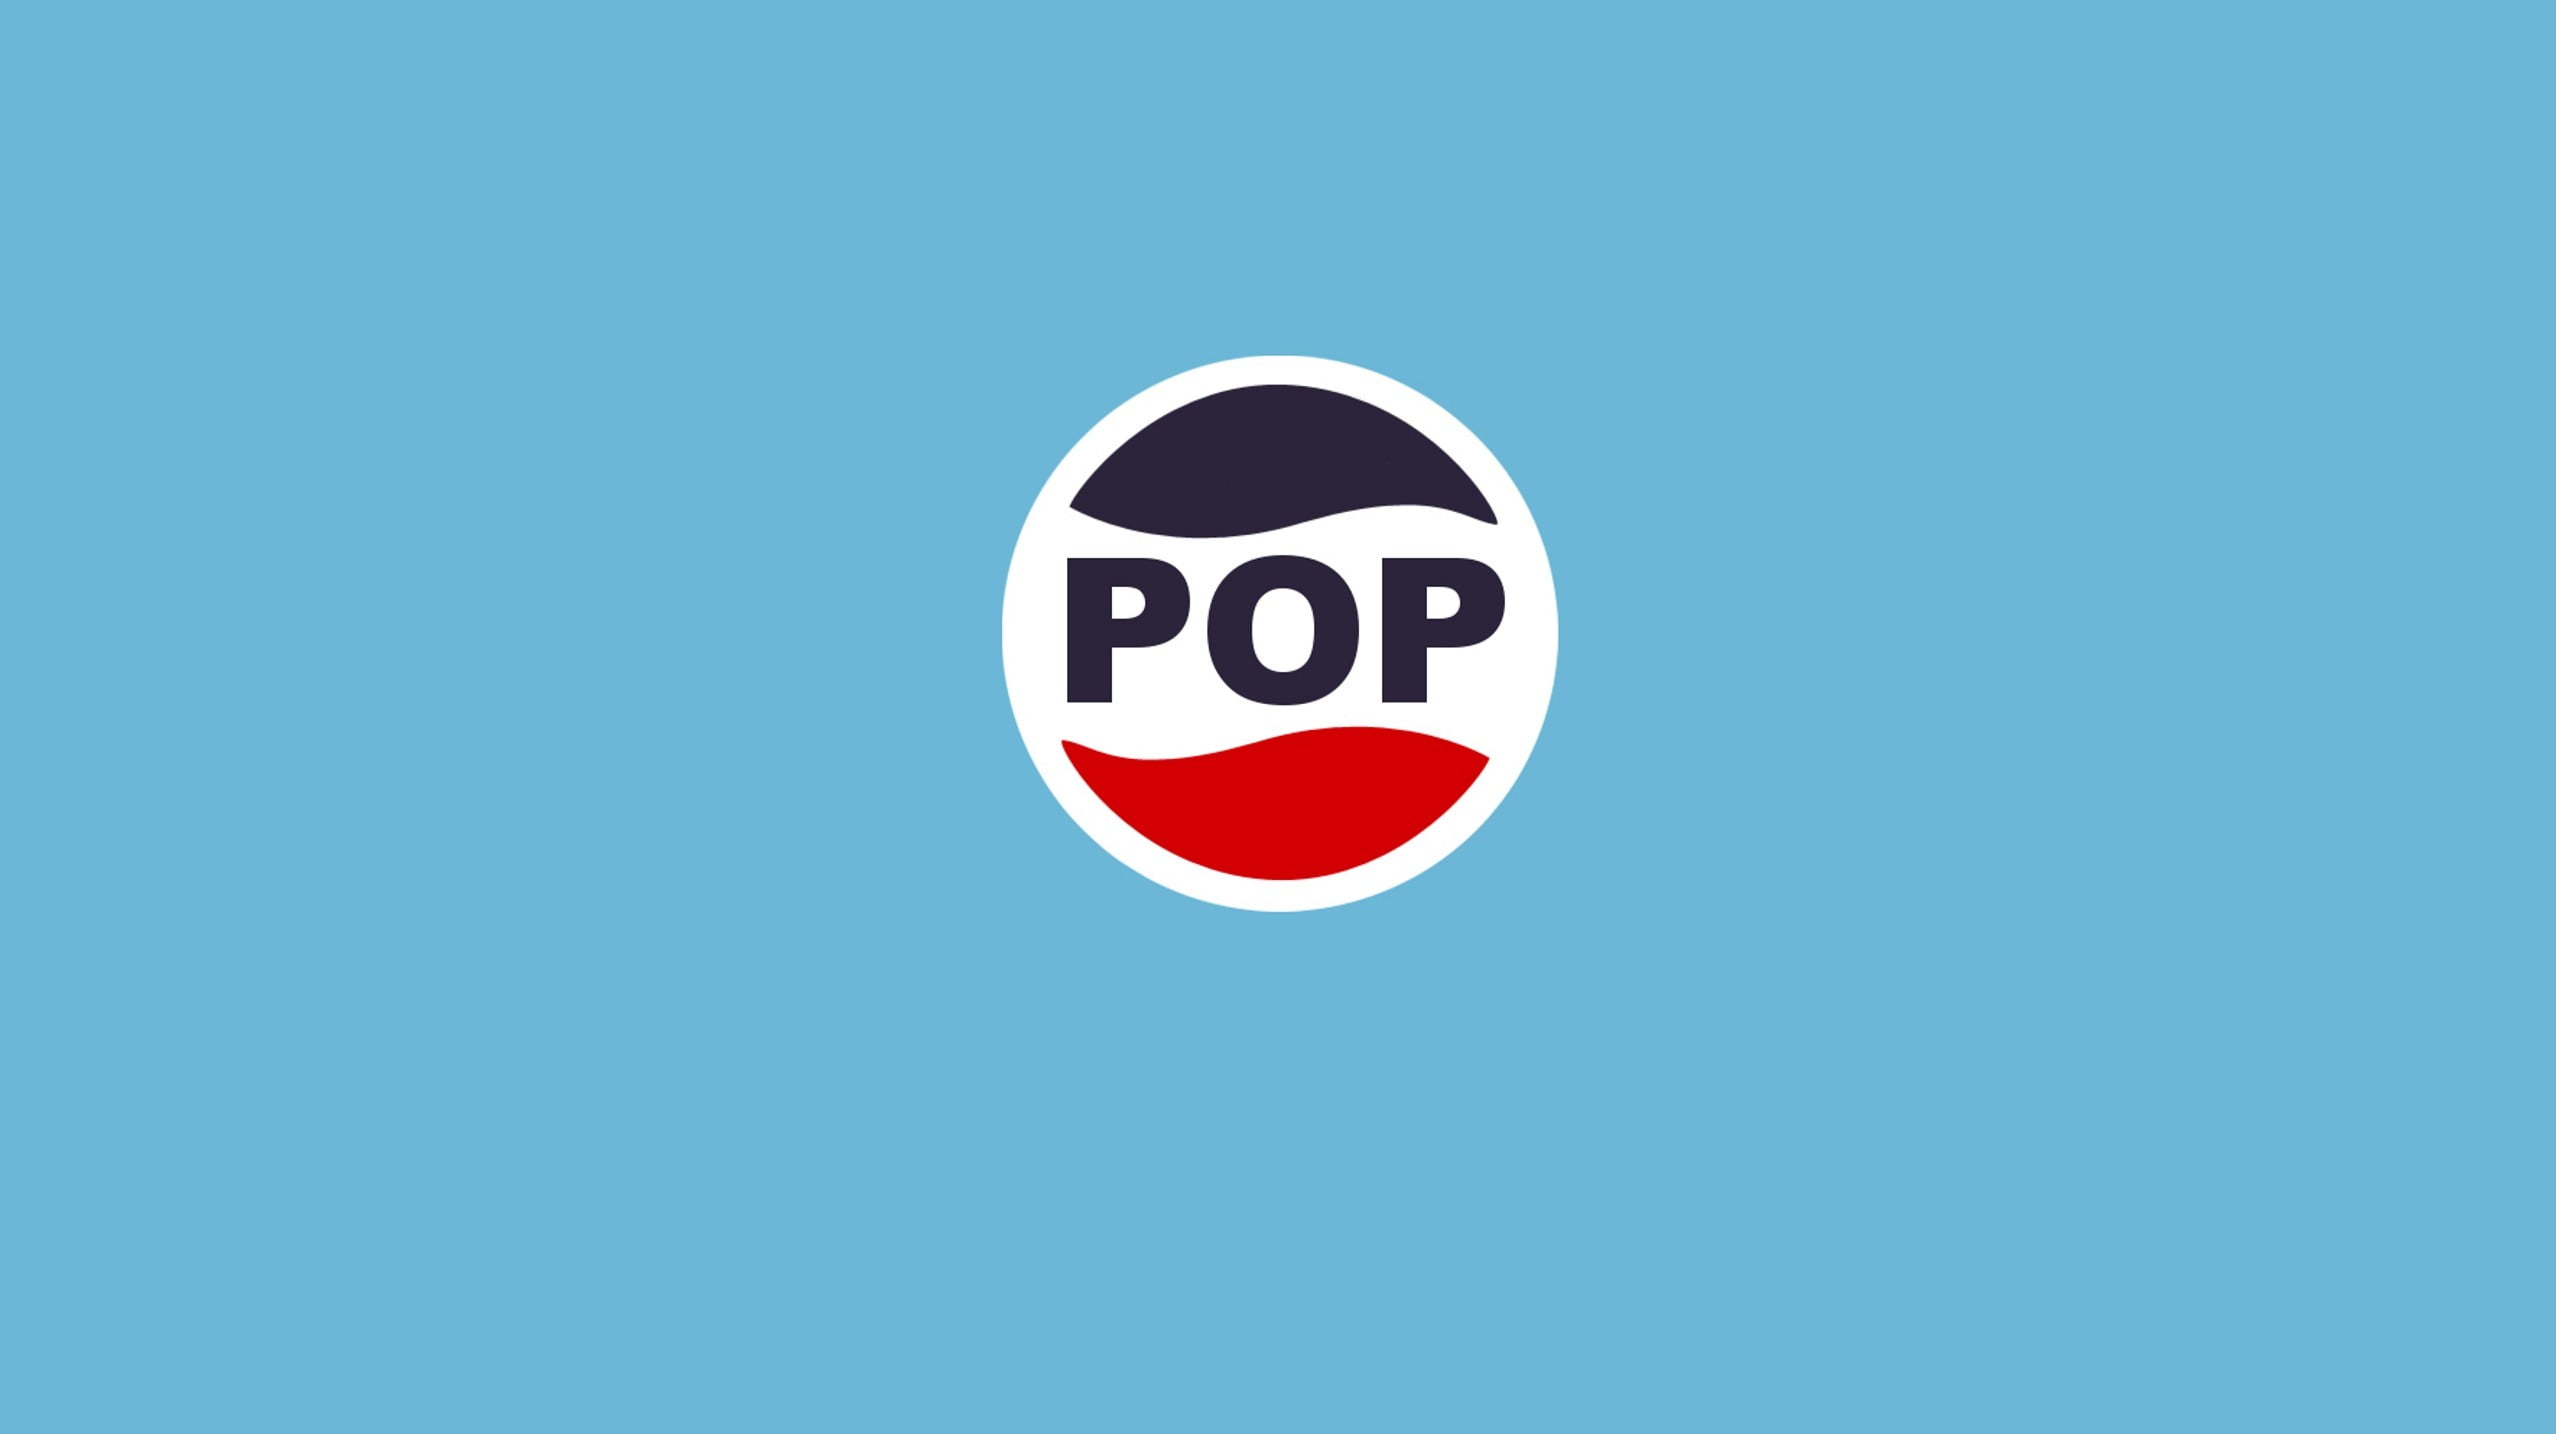 red, white, and blue Pop logo, music, pop music, Pepsi, blue